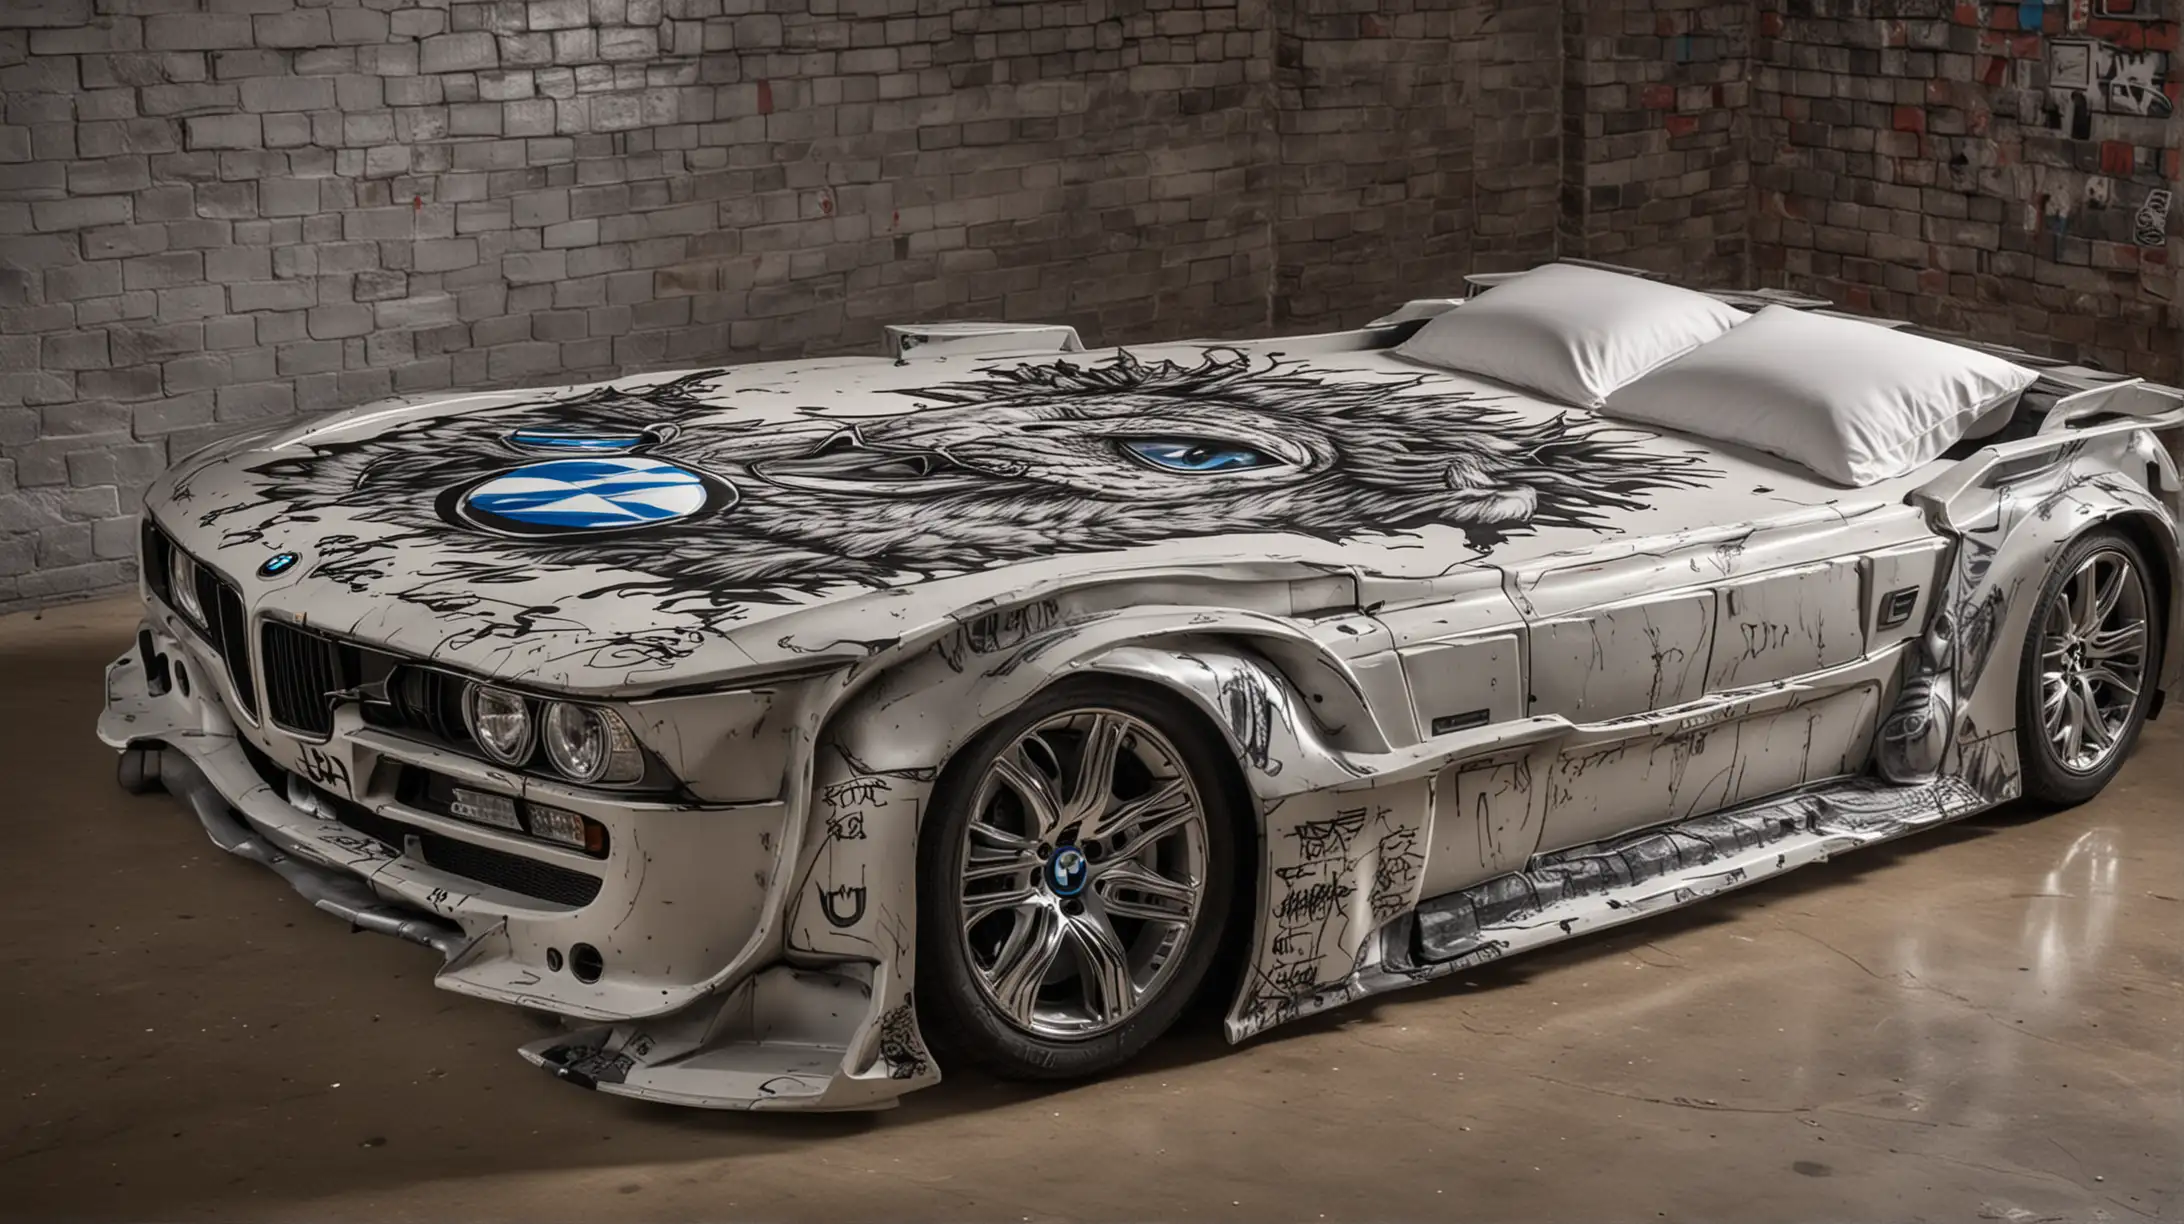 Double bed in the shape of a BMW car with headlights on and with dragon graffiti